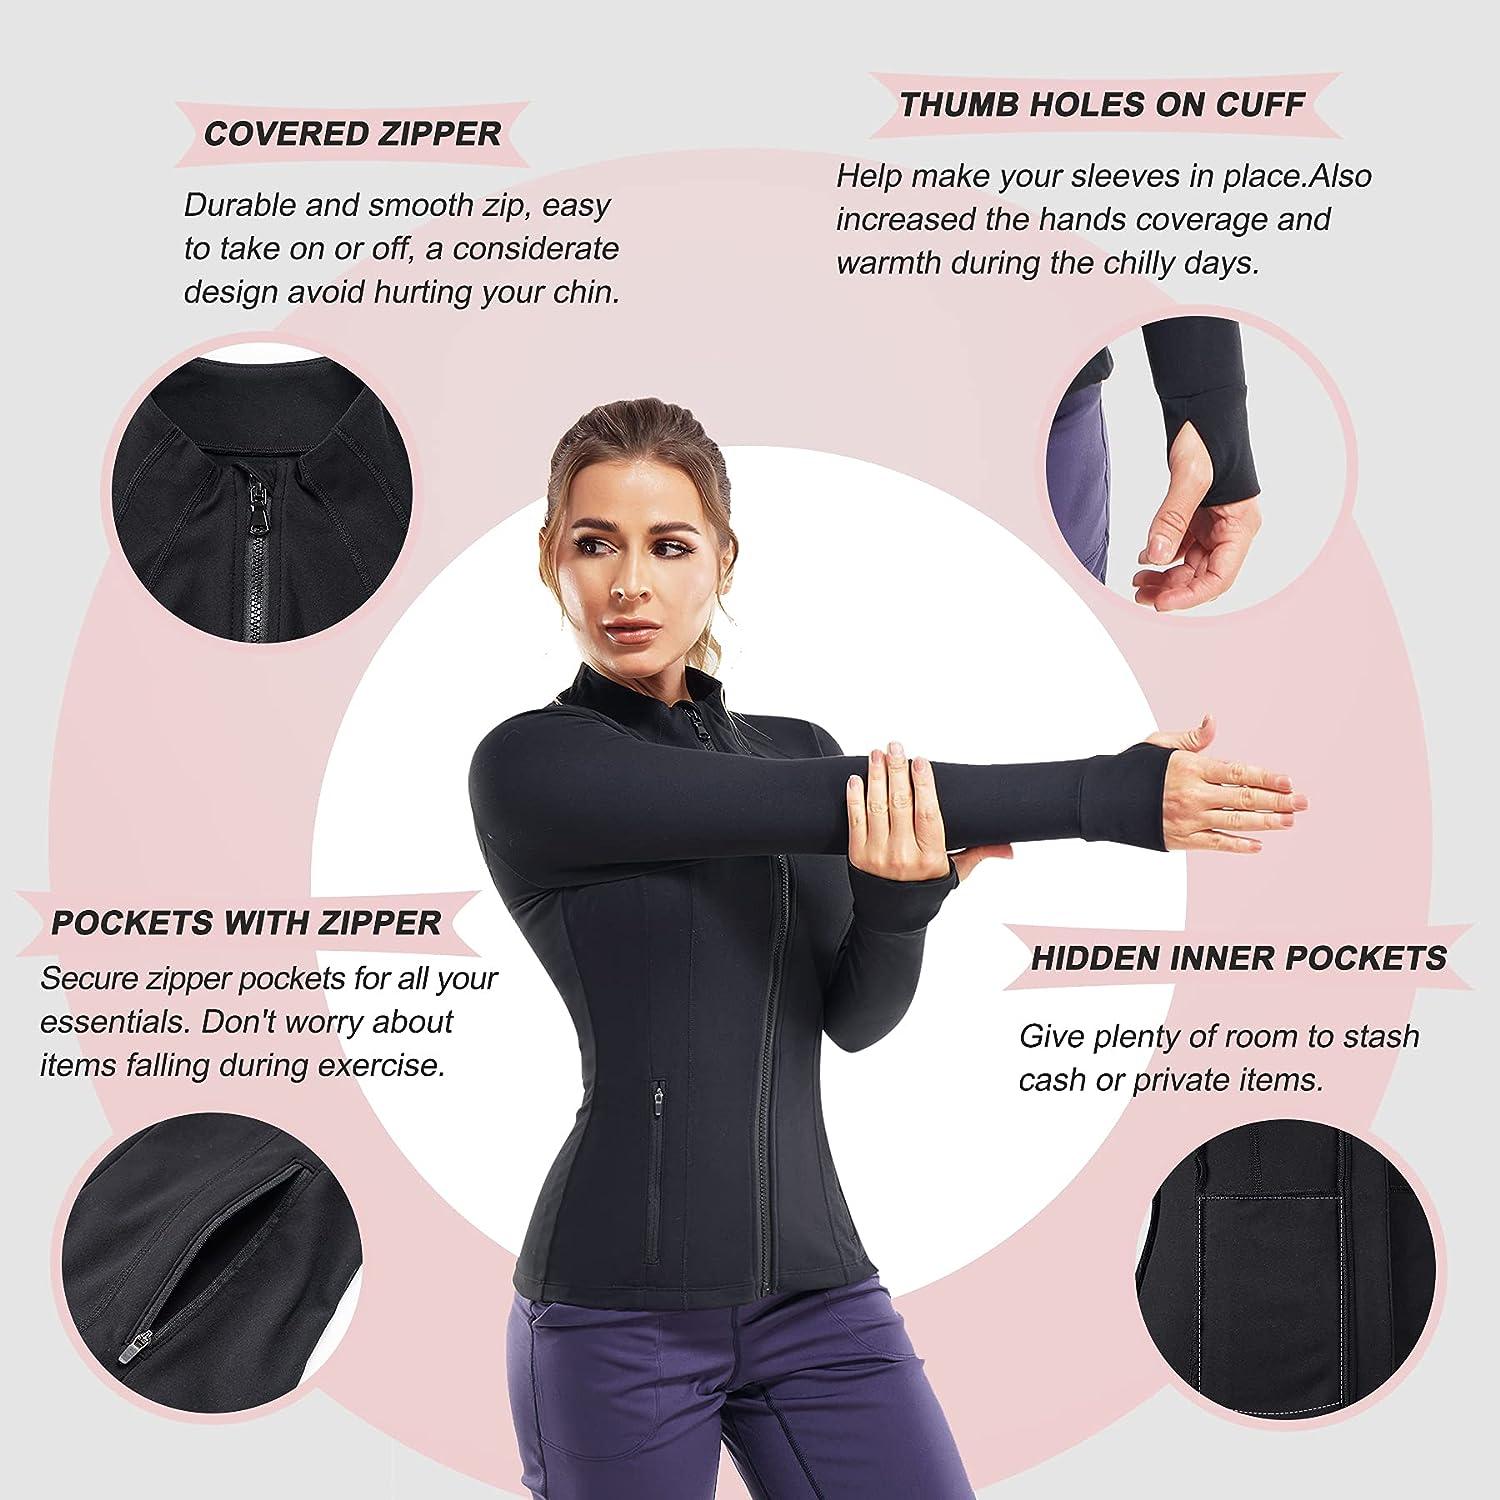 TrainingGirl Women Cutout Workout Crop Tops Long Sleeves Open Back Yoga  Shirts Slim Fit Gym Athletic Shirts with Built in Bra